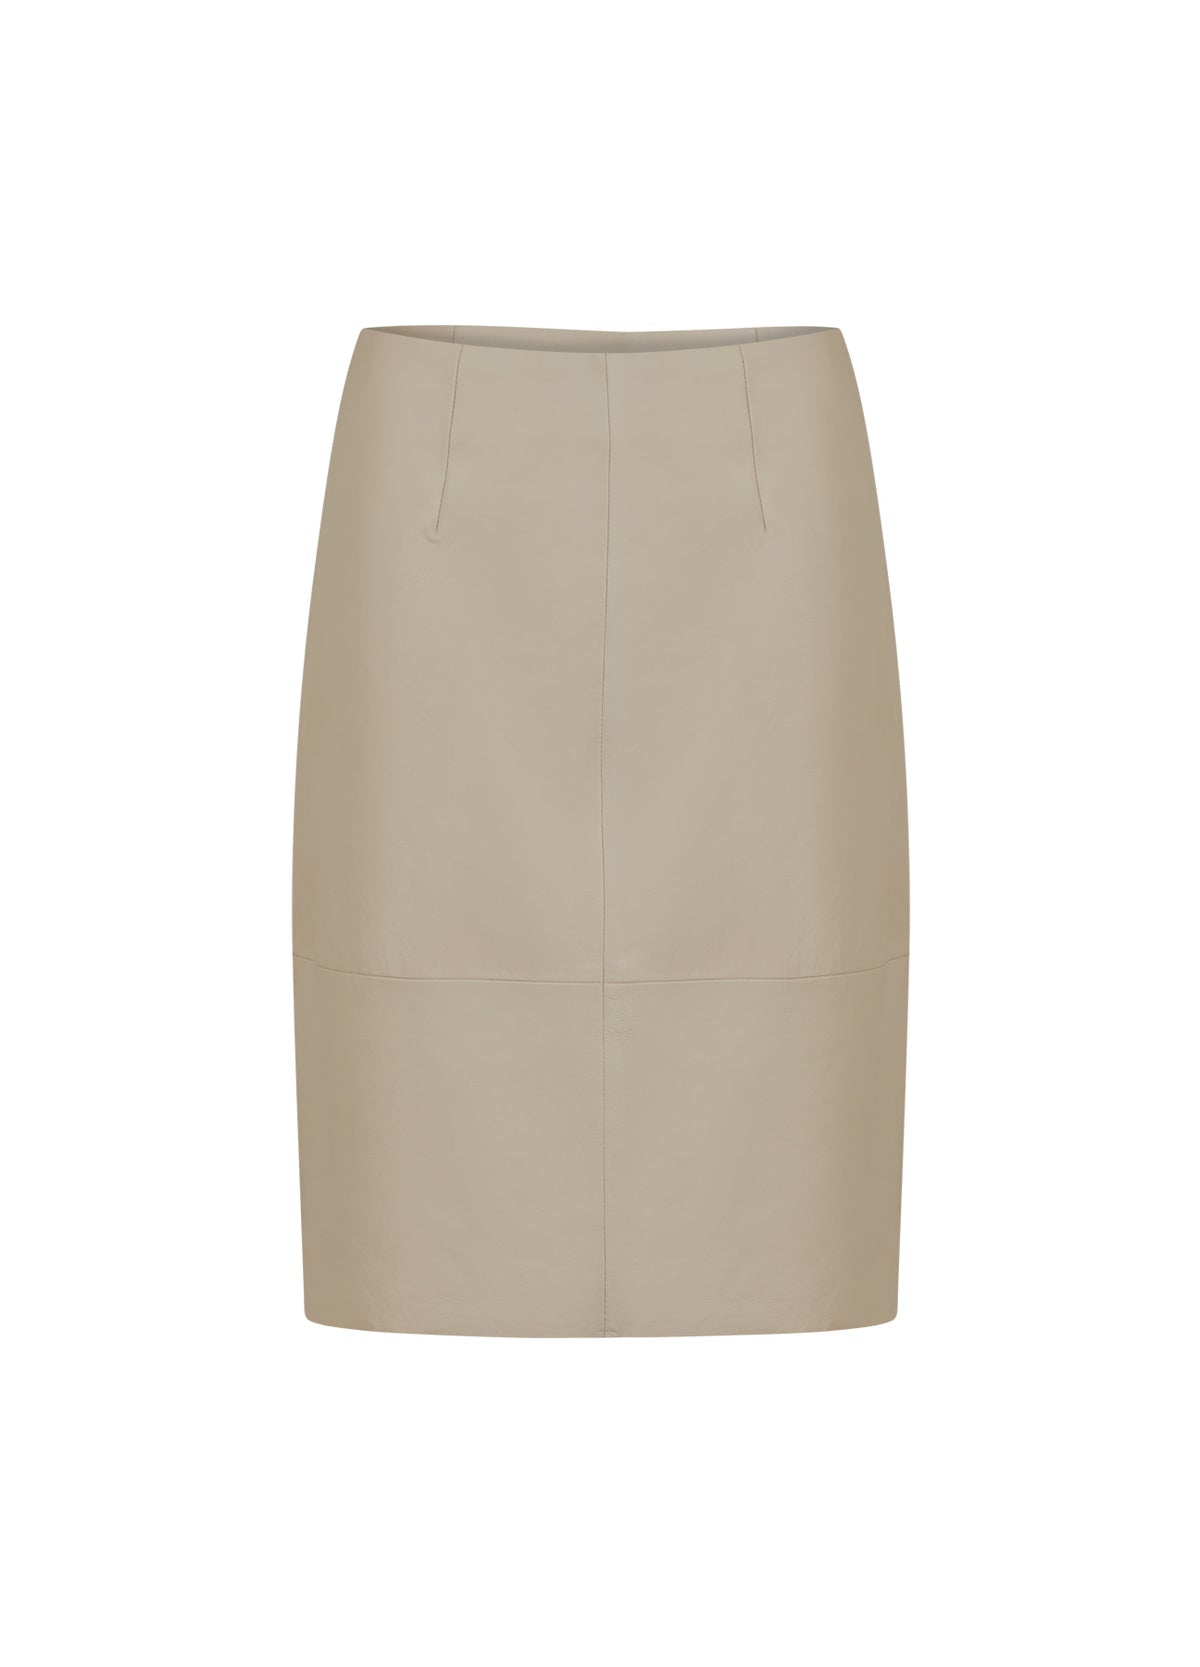 Maggie Leather Skirt in Cold Cream